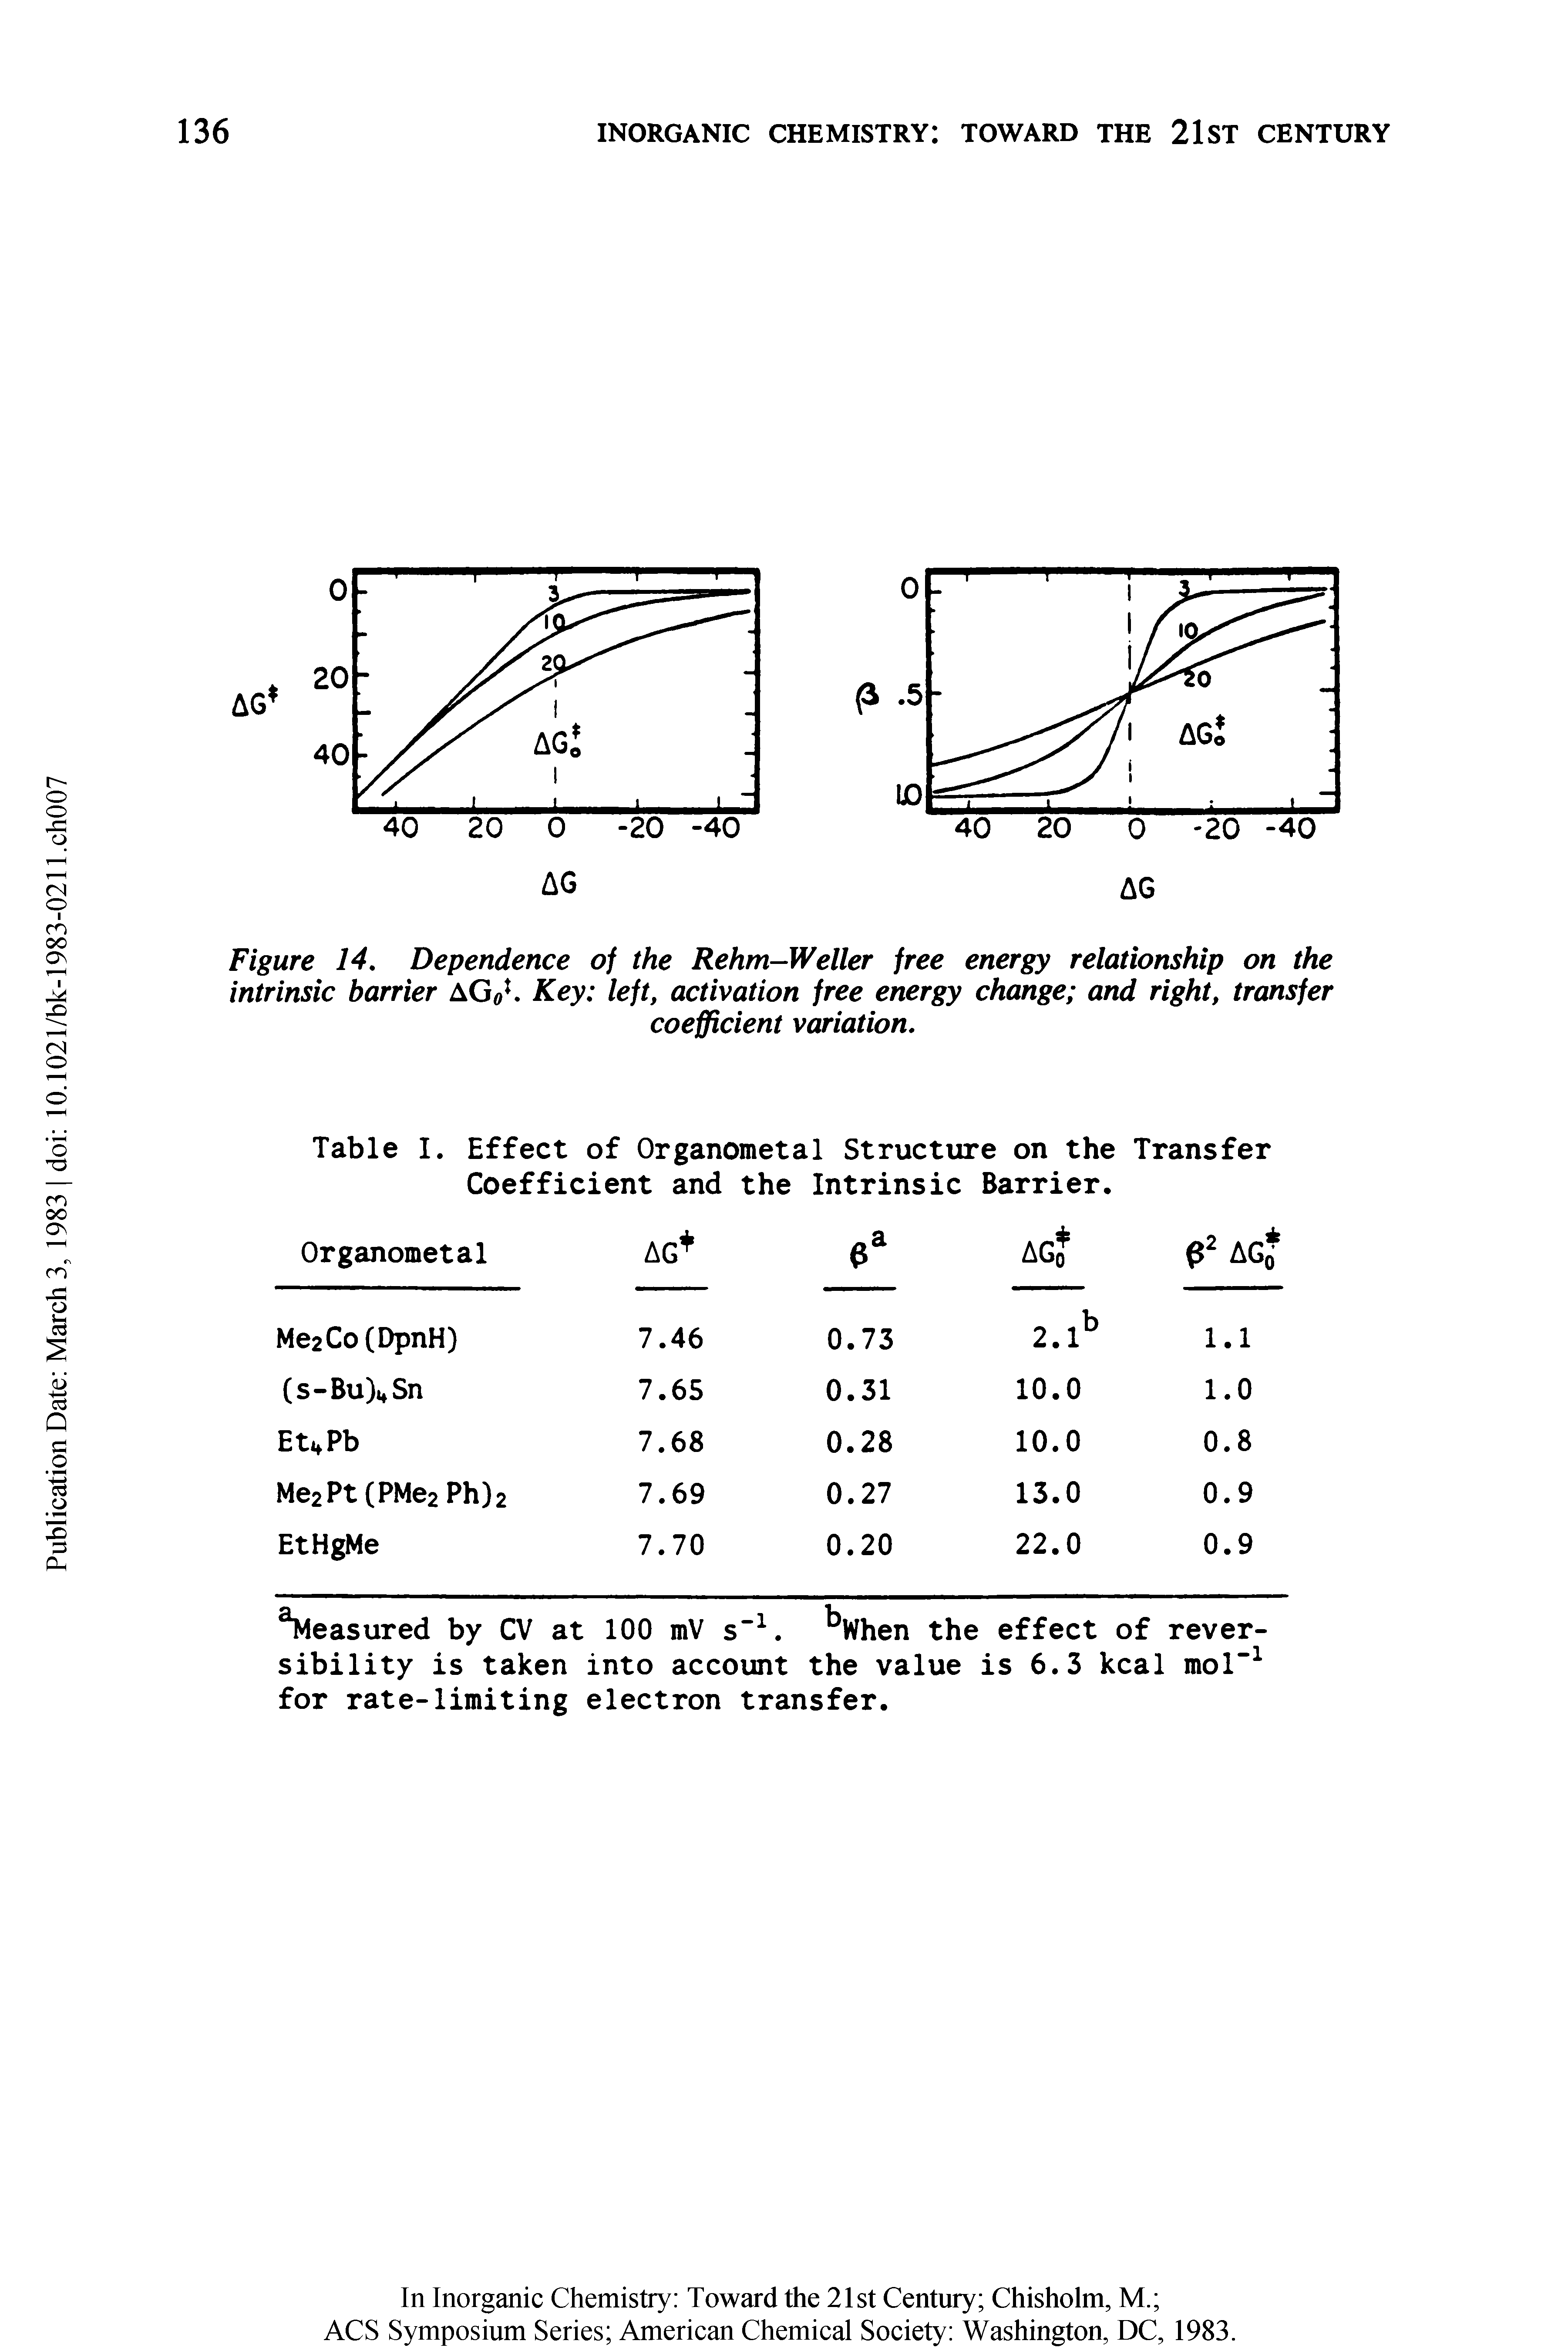 Figure 14. Dependence of the Rehm-Weller free energy relationship on the intrinsic barrier AG. Key left, activation free energy change and right, transfer...